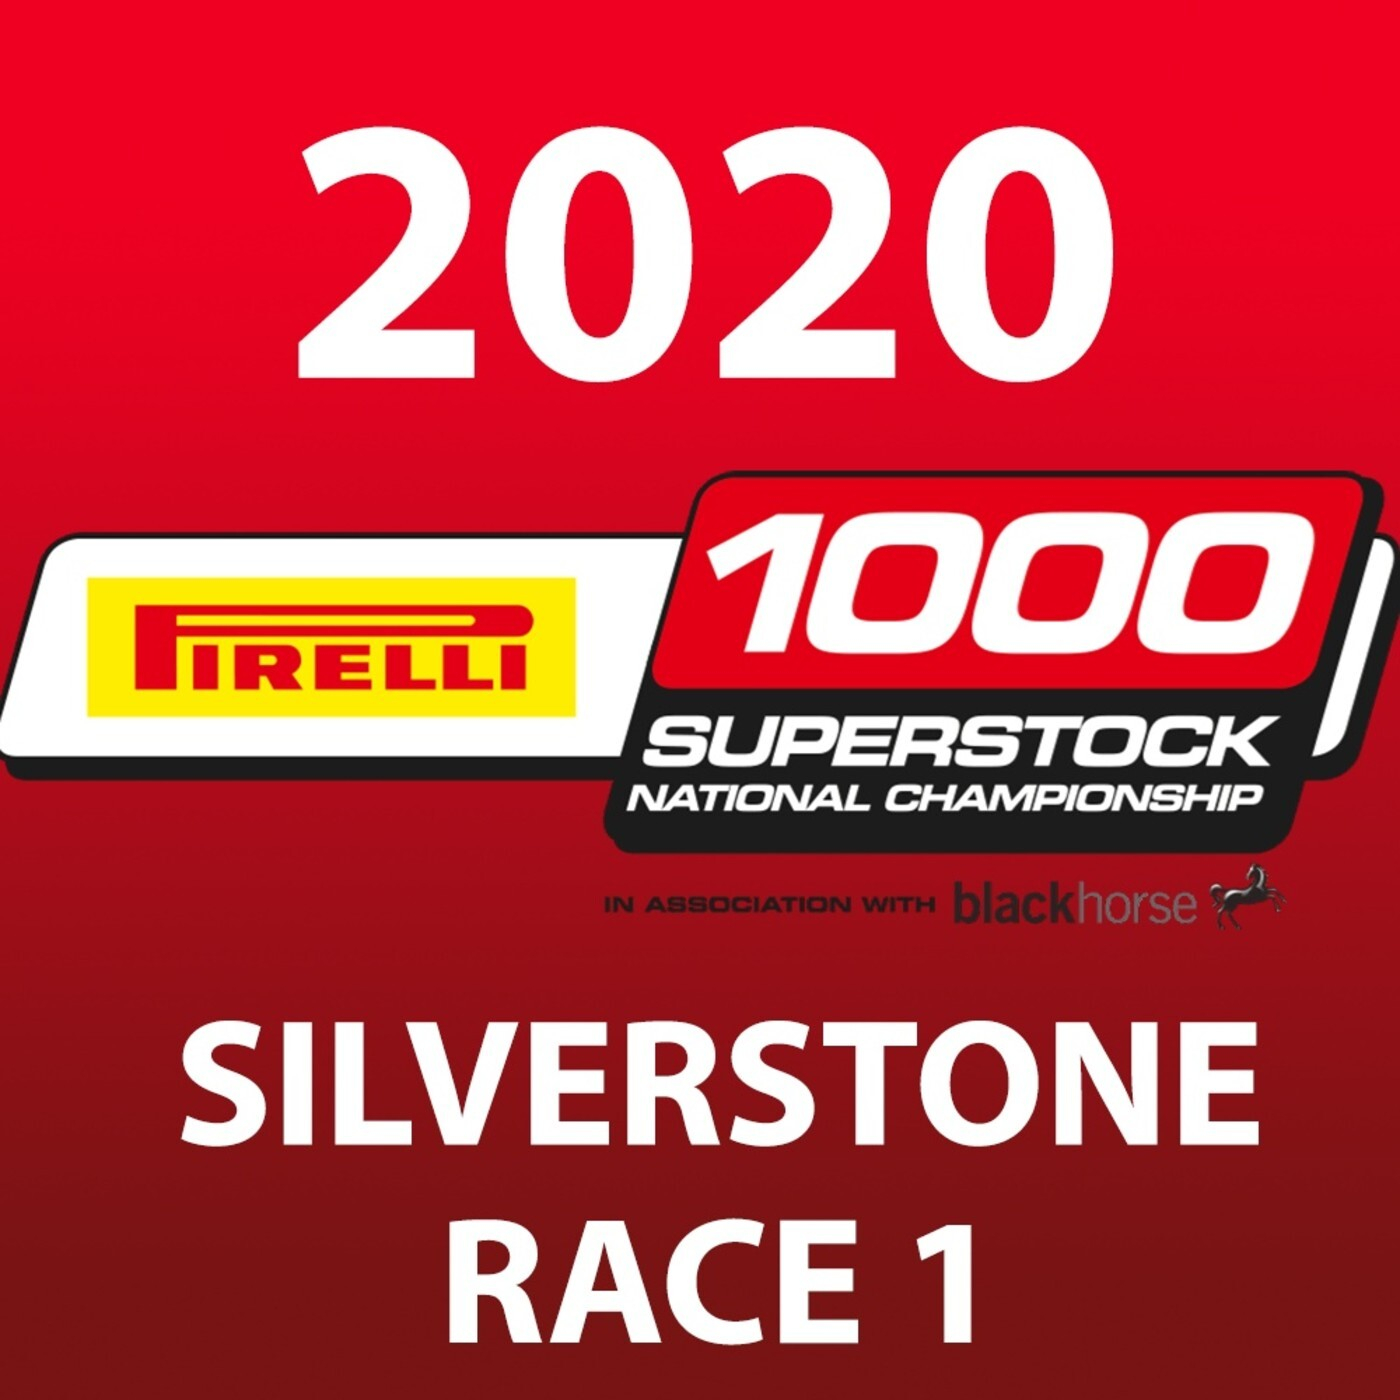 Pirelli National Superstock 1000 in association with Black Horse - Silverstone 2020 RACE 1